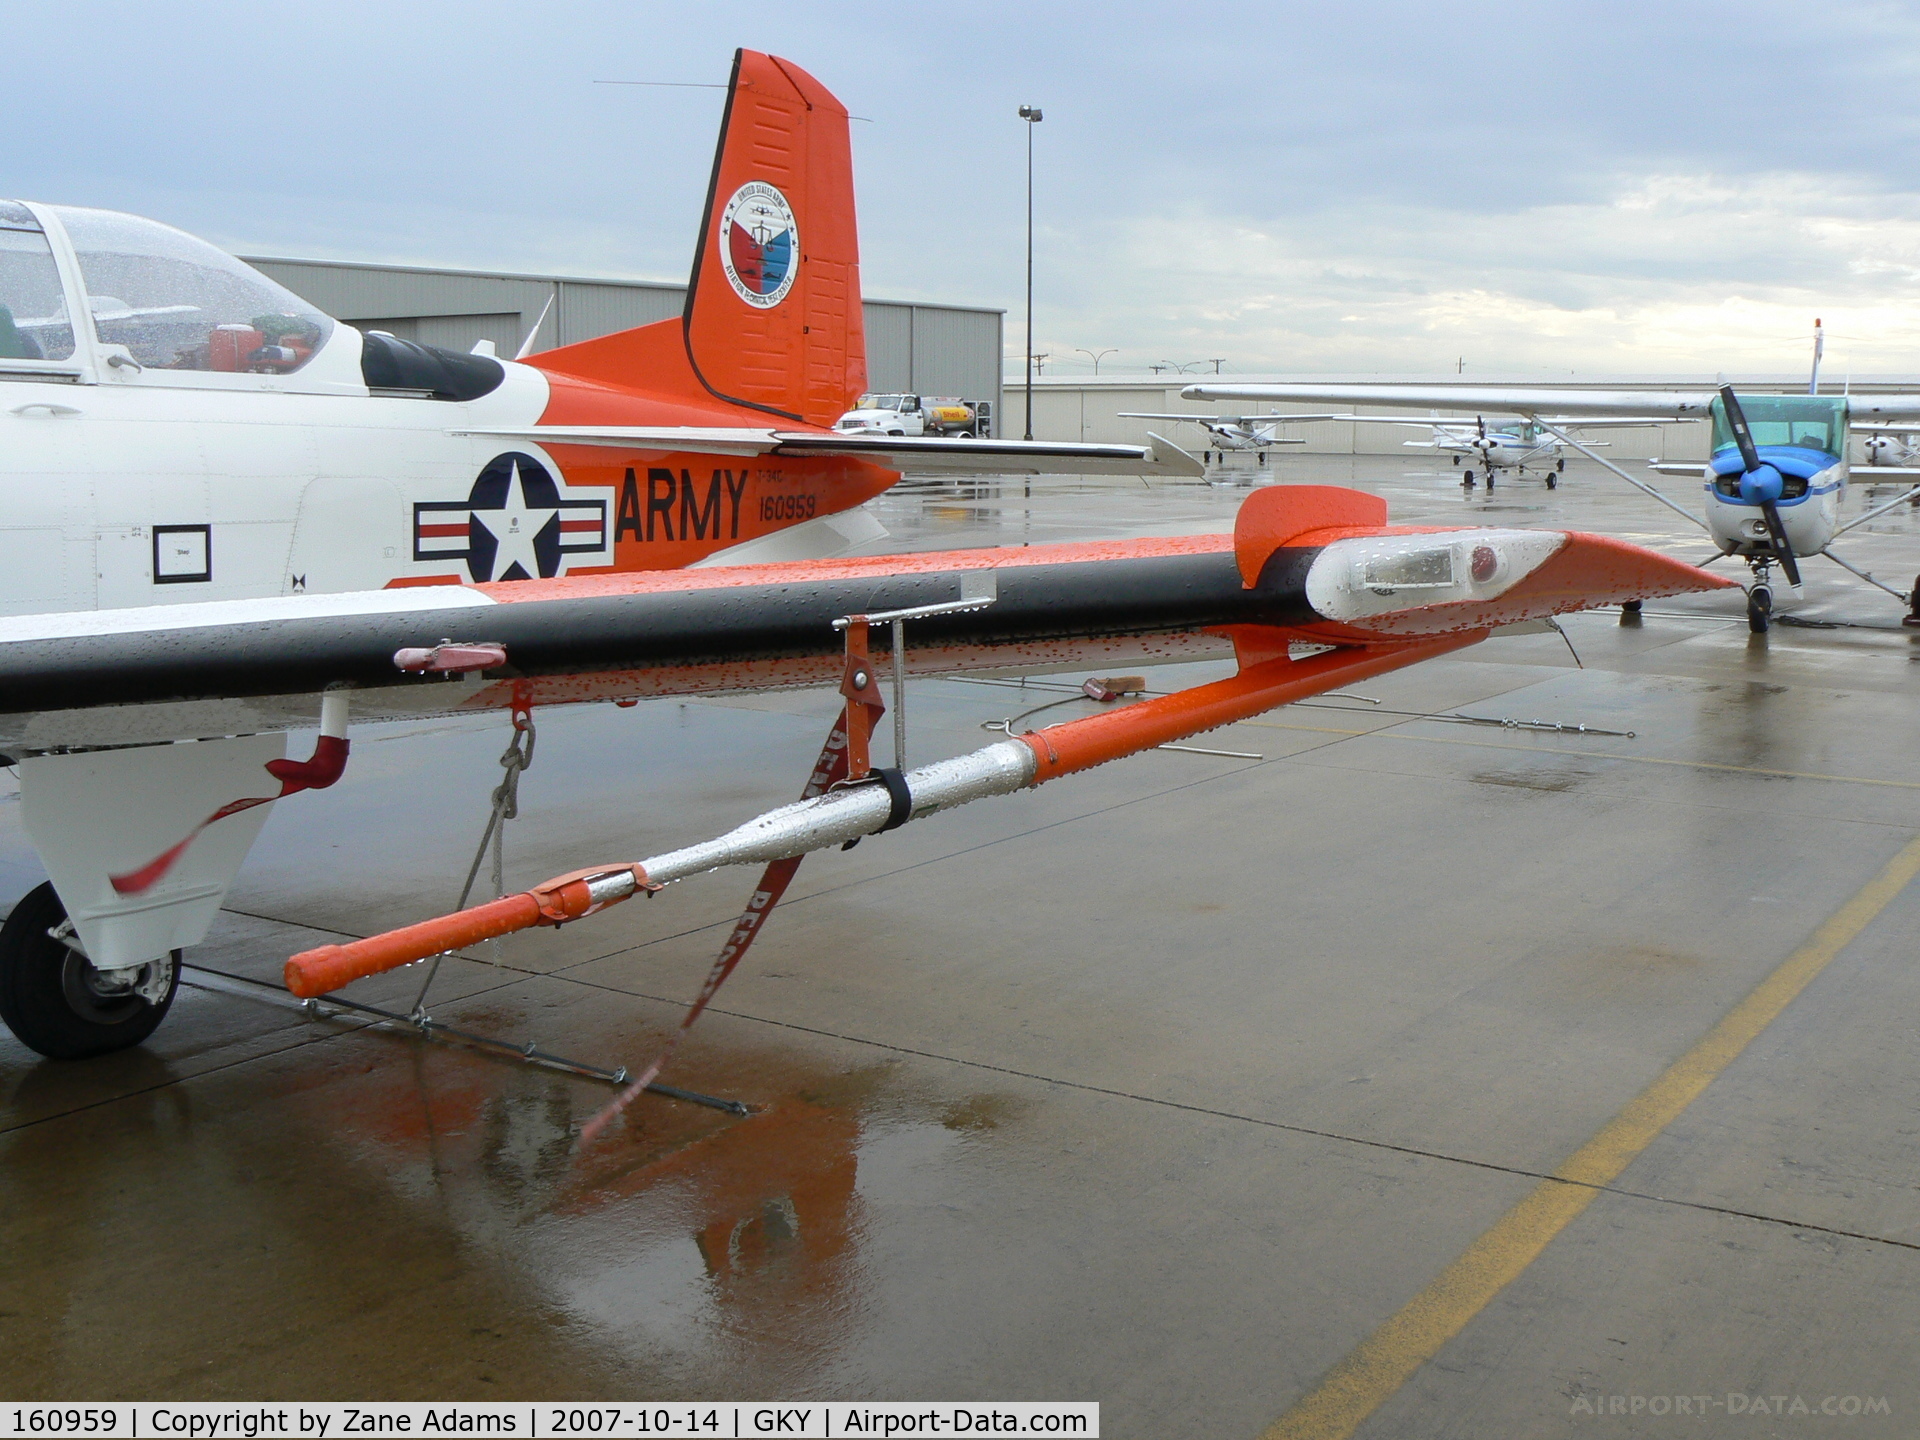 160959, Beech T-34C Turbo Mentor C/N GL-145, US Army Aviation Technical Test Center